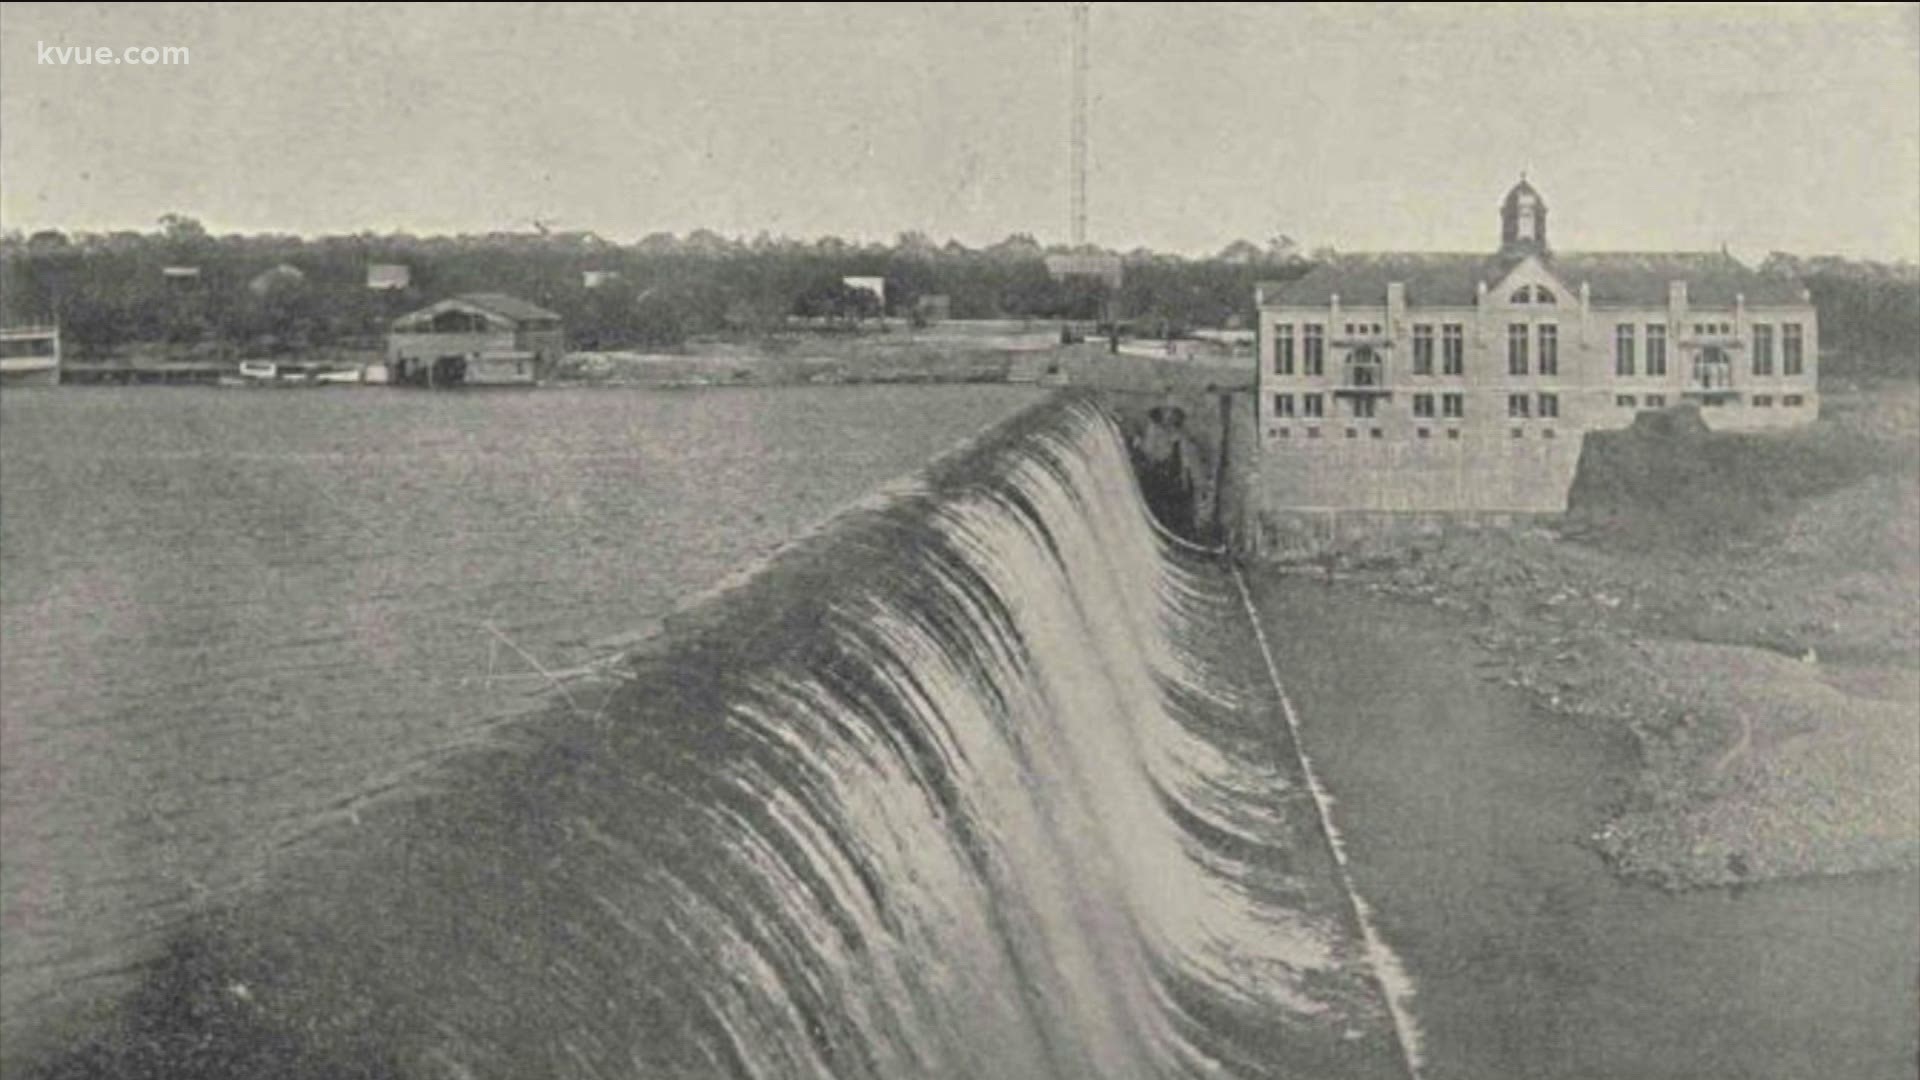 Huge dams that collapsed during flooding brought catastrophe to Austin in earlier times.